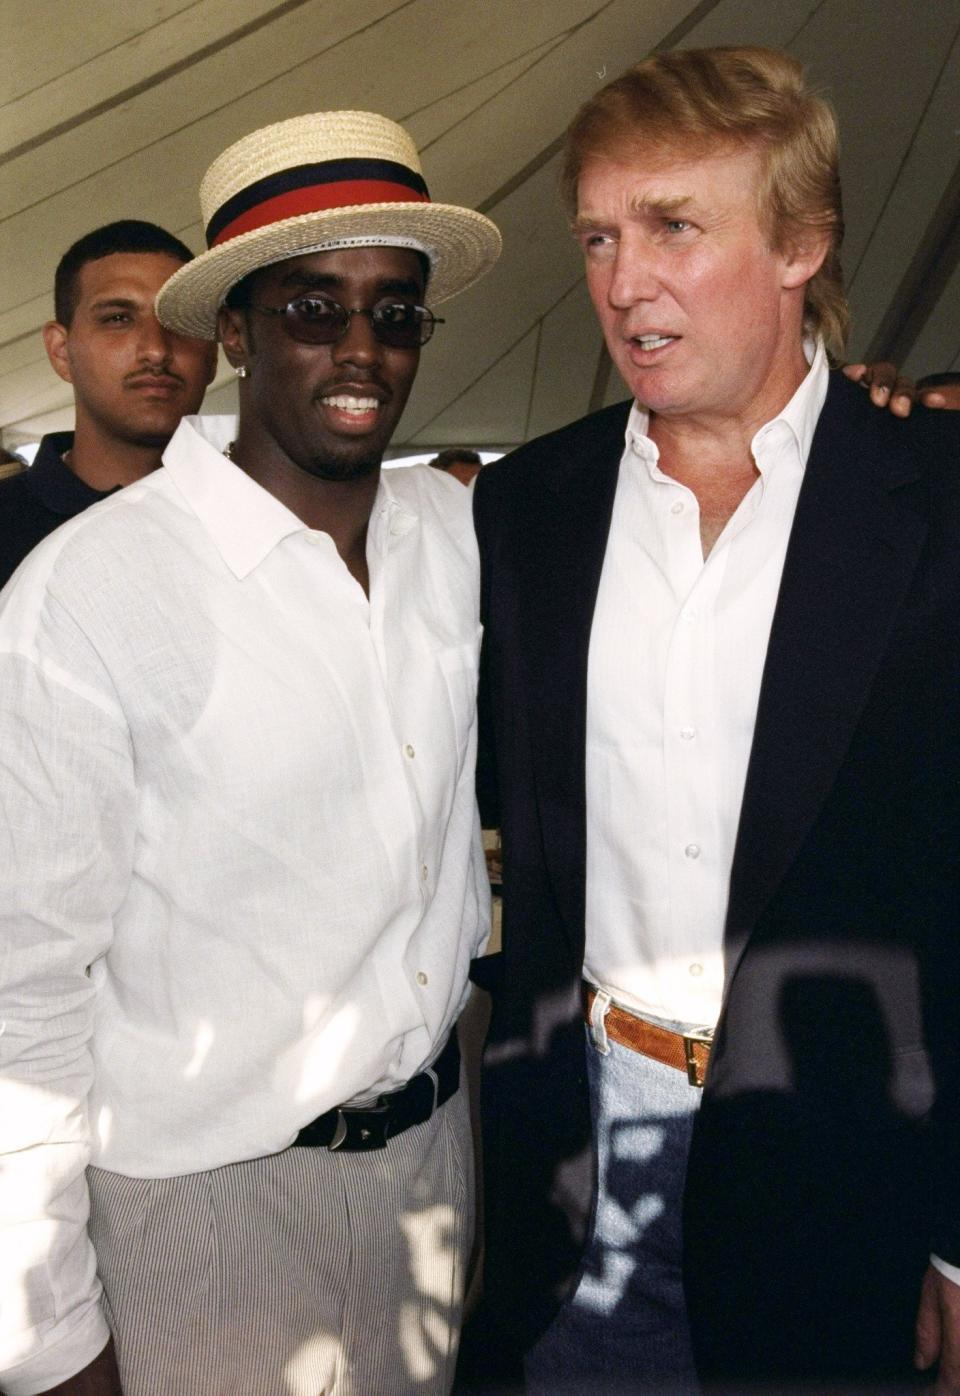 Pictured with Sean Combs.